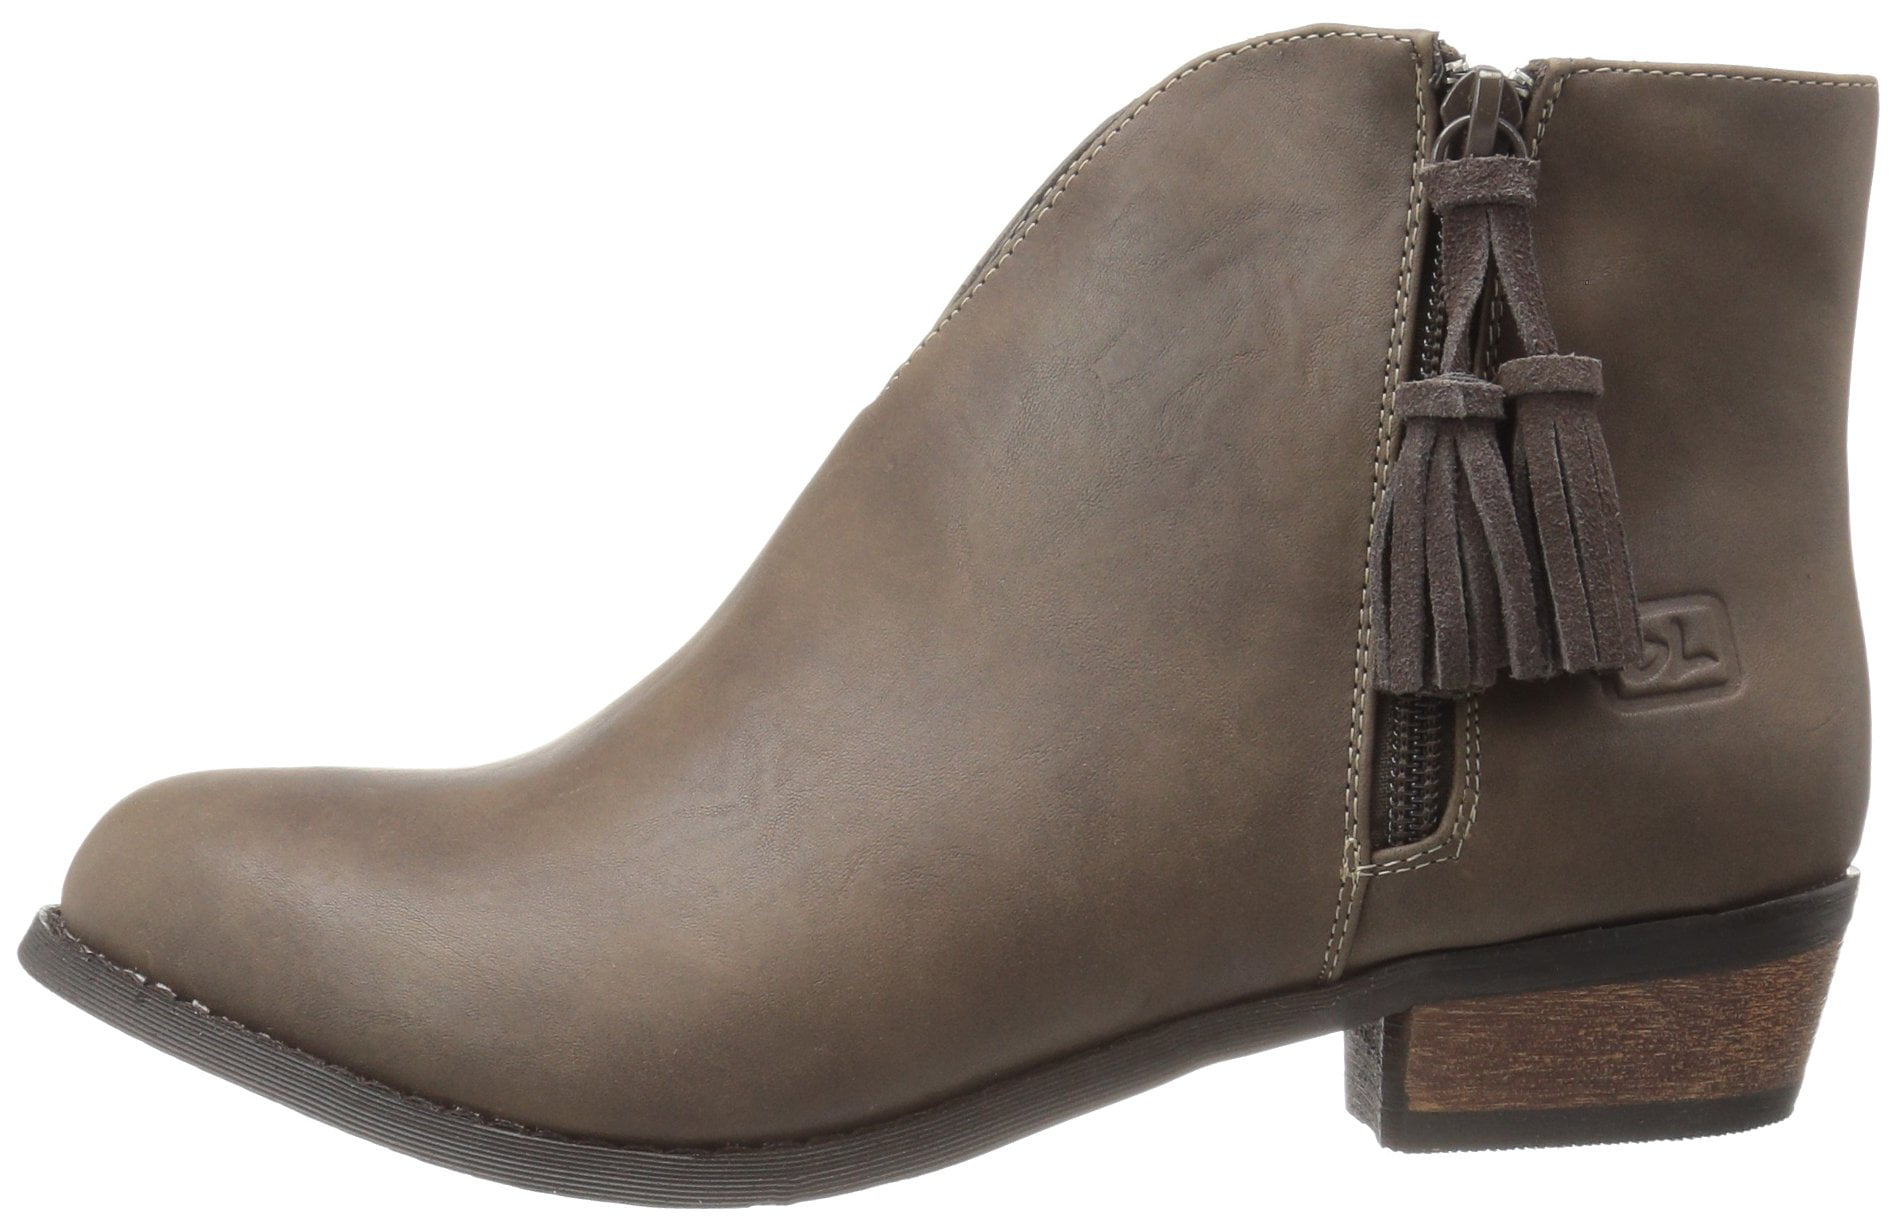 Dirty Laundry by Chinese Laundry Womens Chrystal Boot 